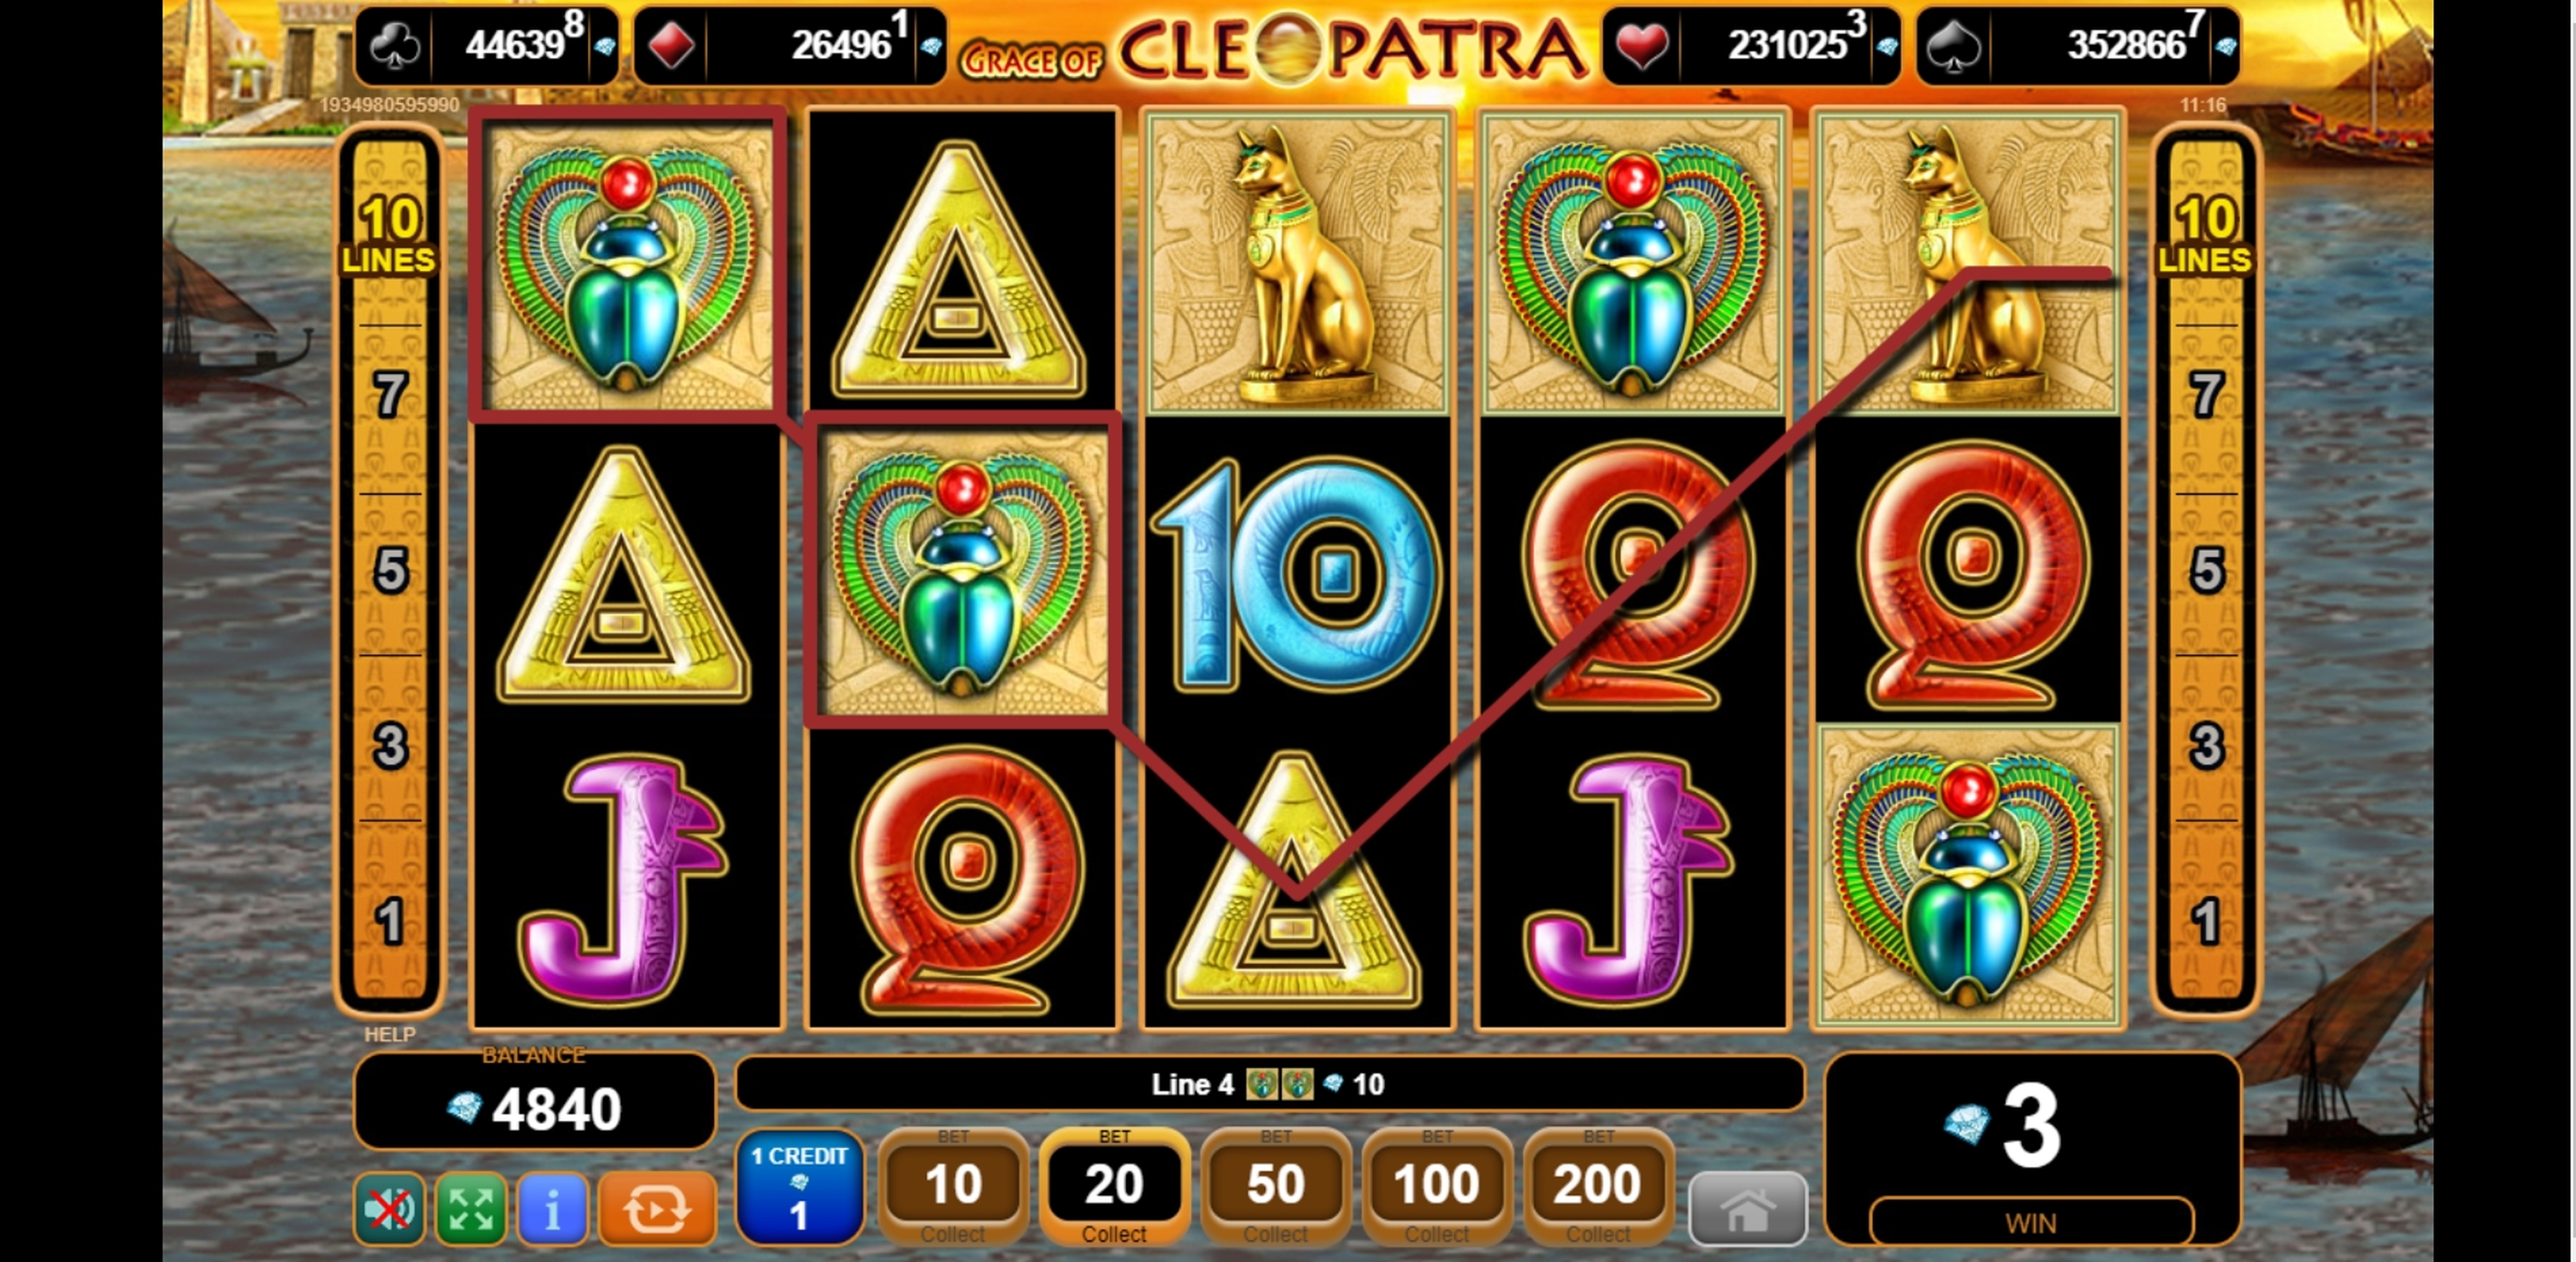 Win Money in Grace of Cleopatra Free Slot Game by EGT